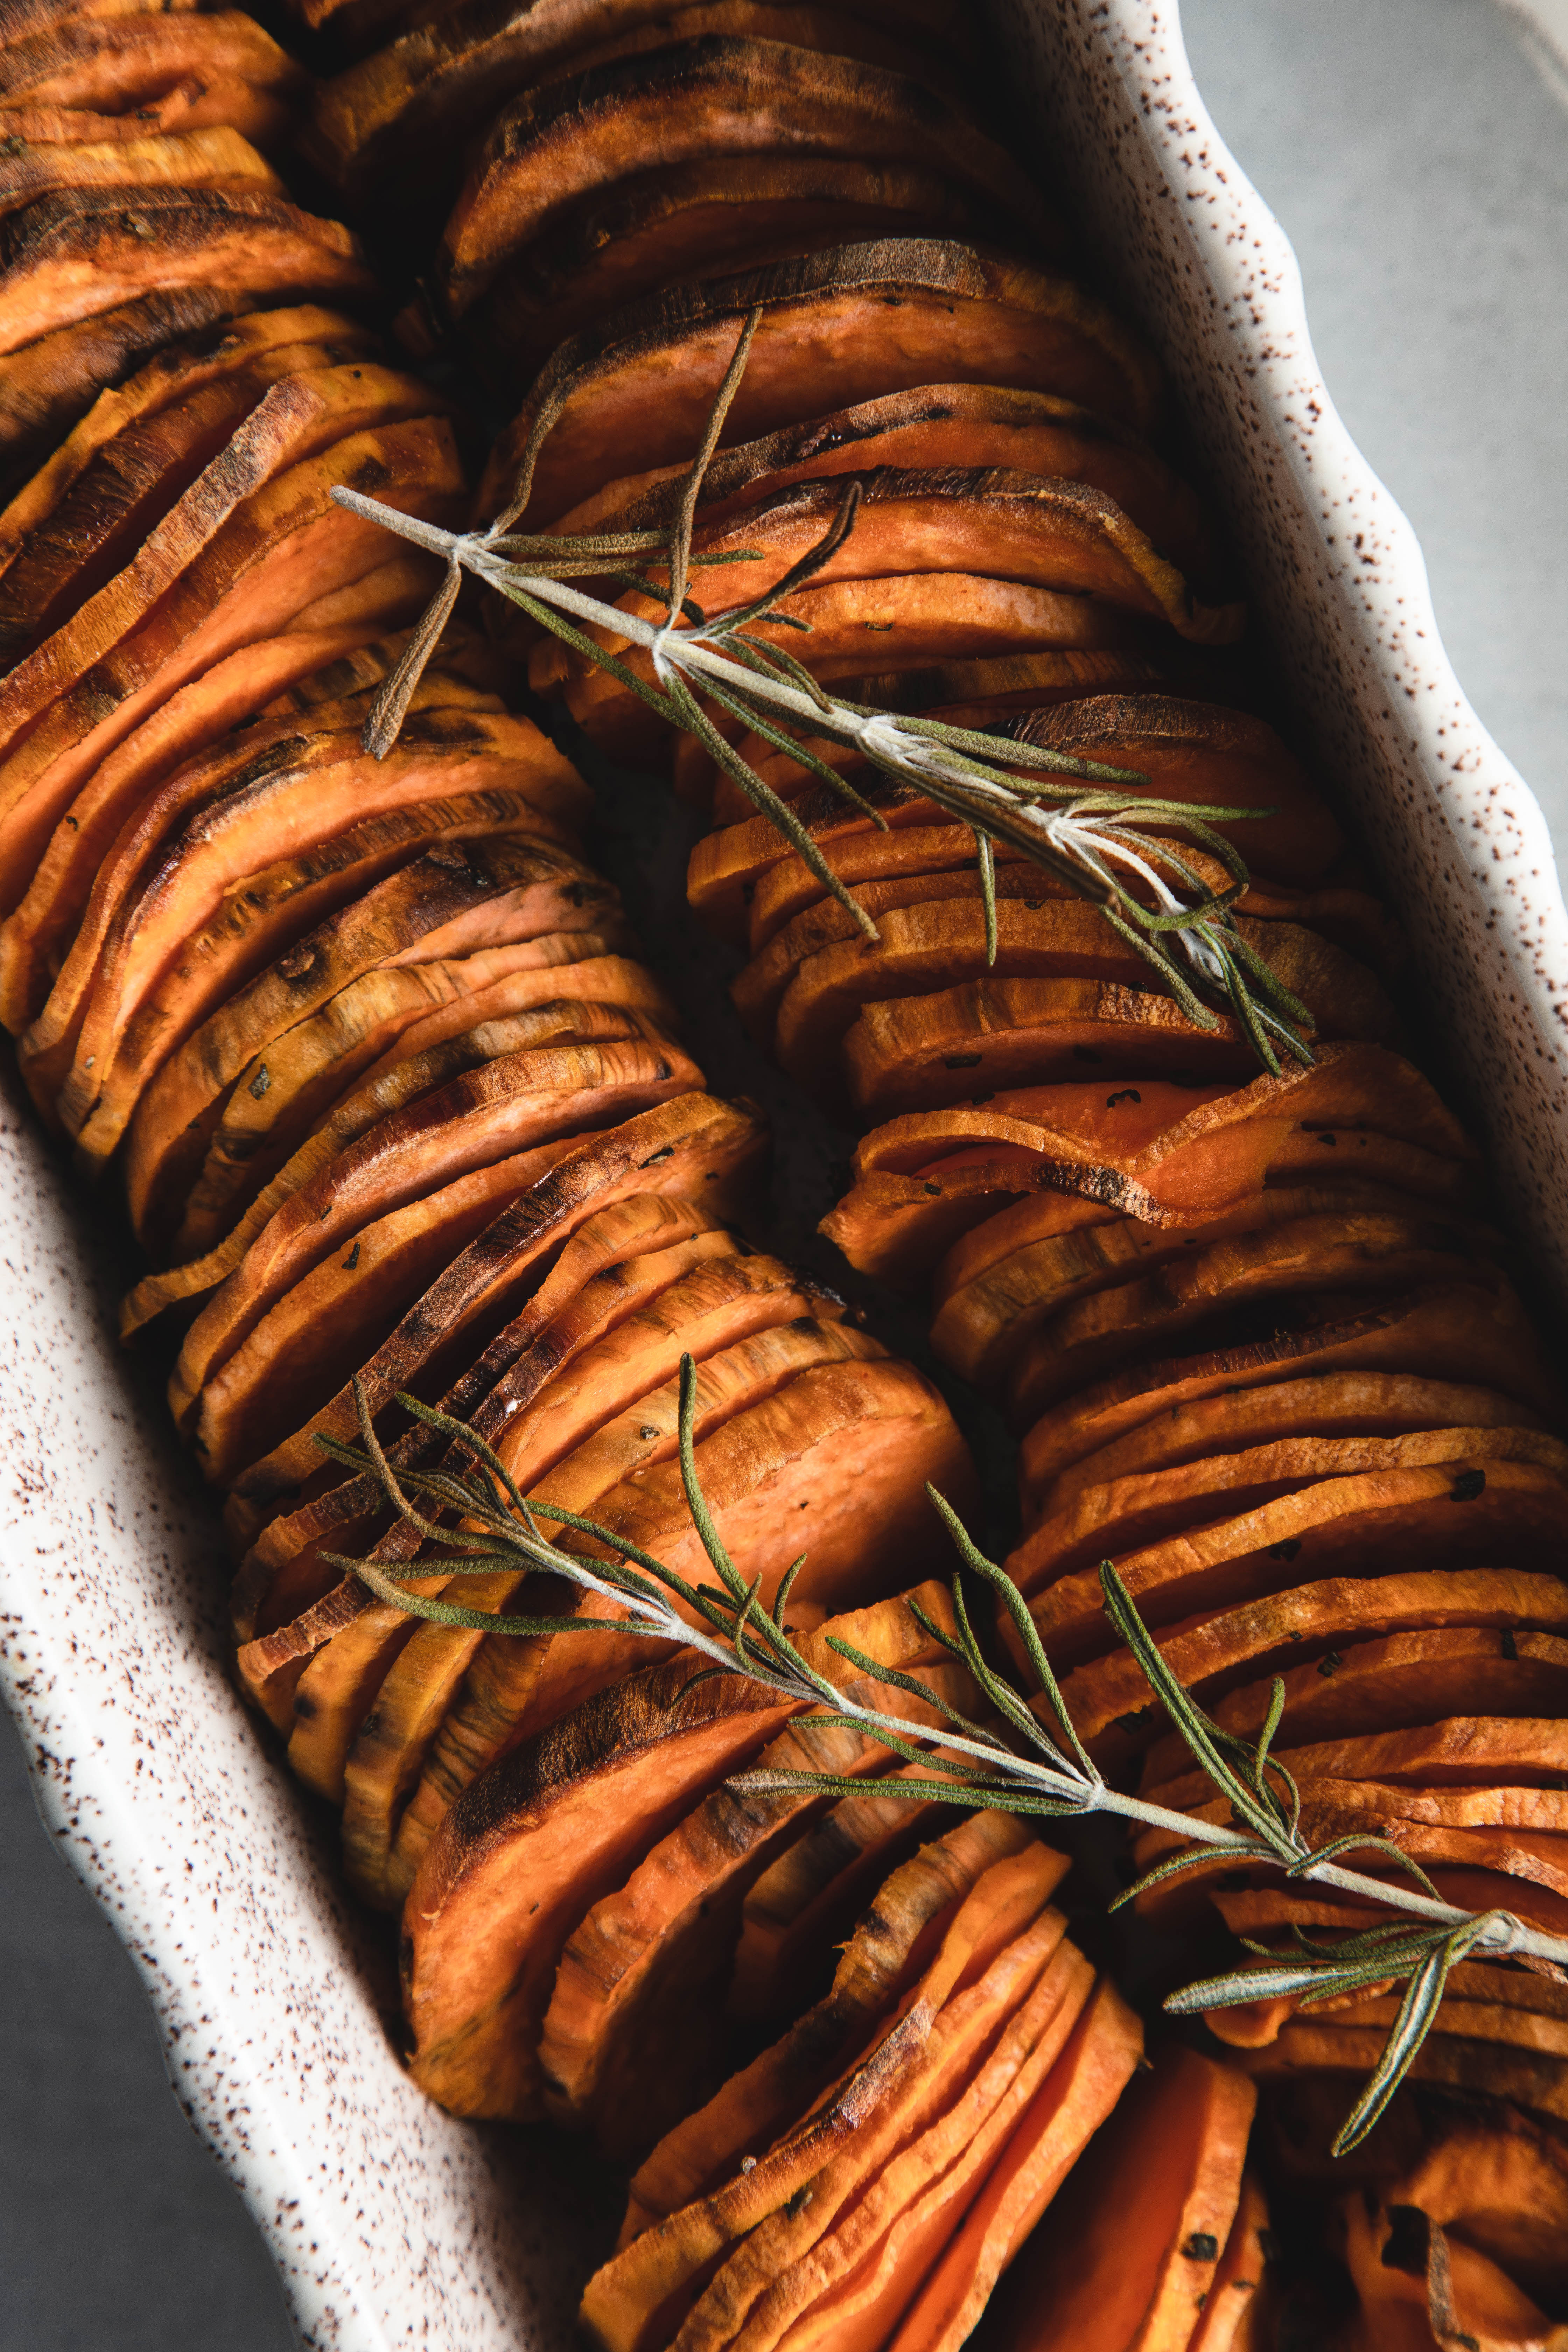 Shingled Sweet Potato Recipes by Cashmere & Cocktails